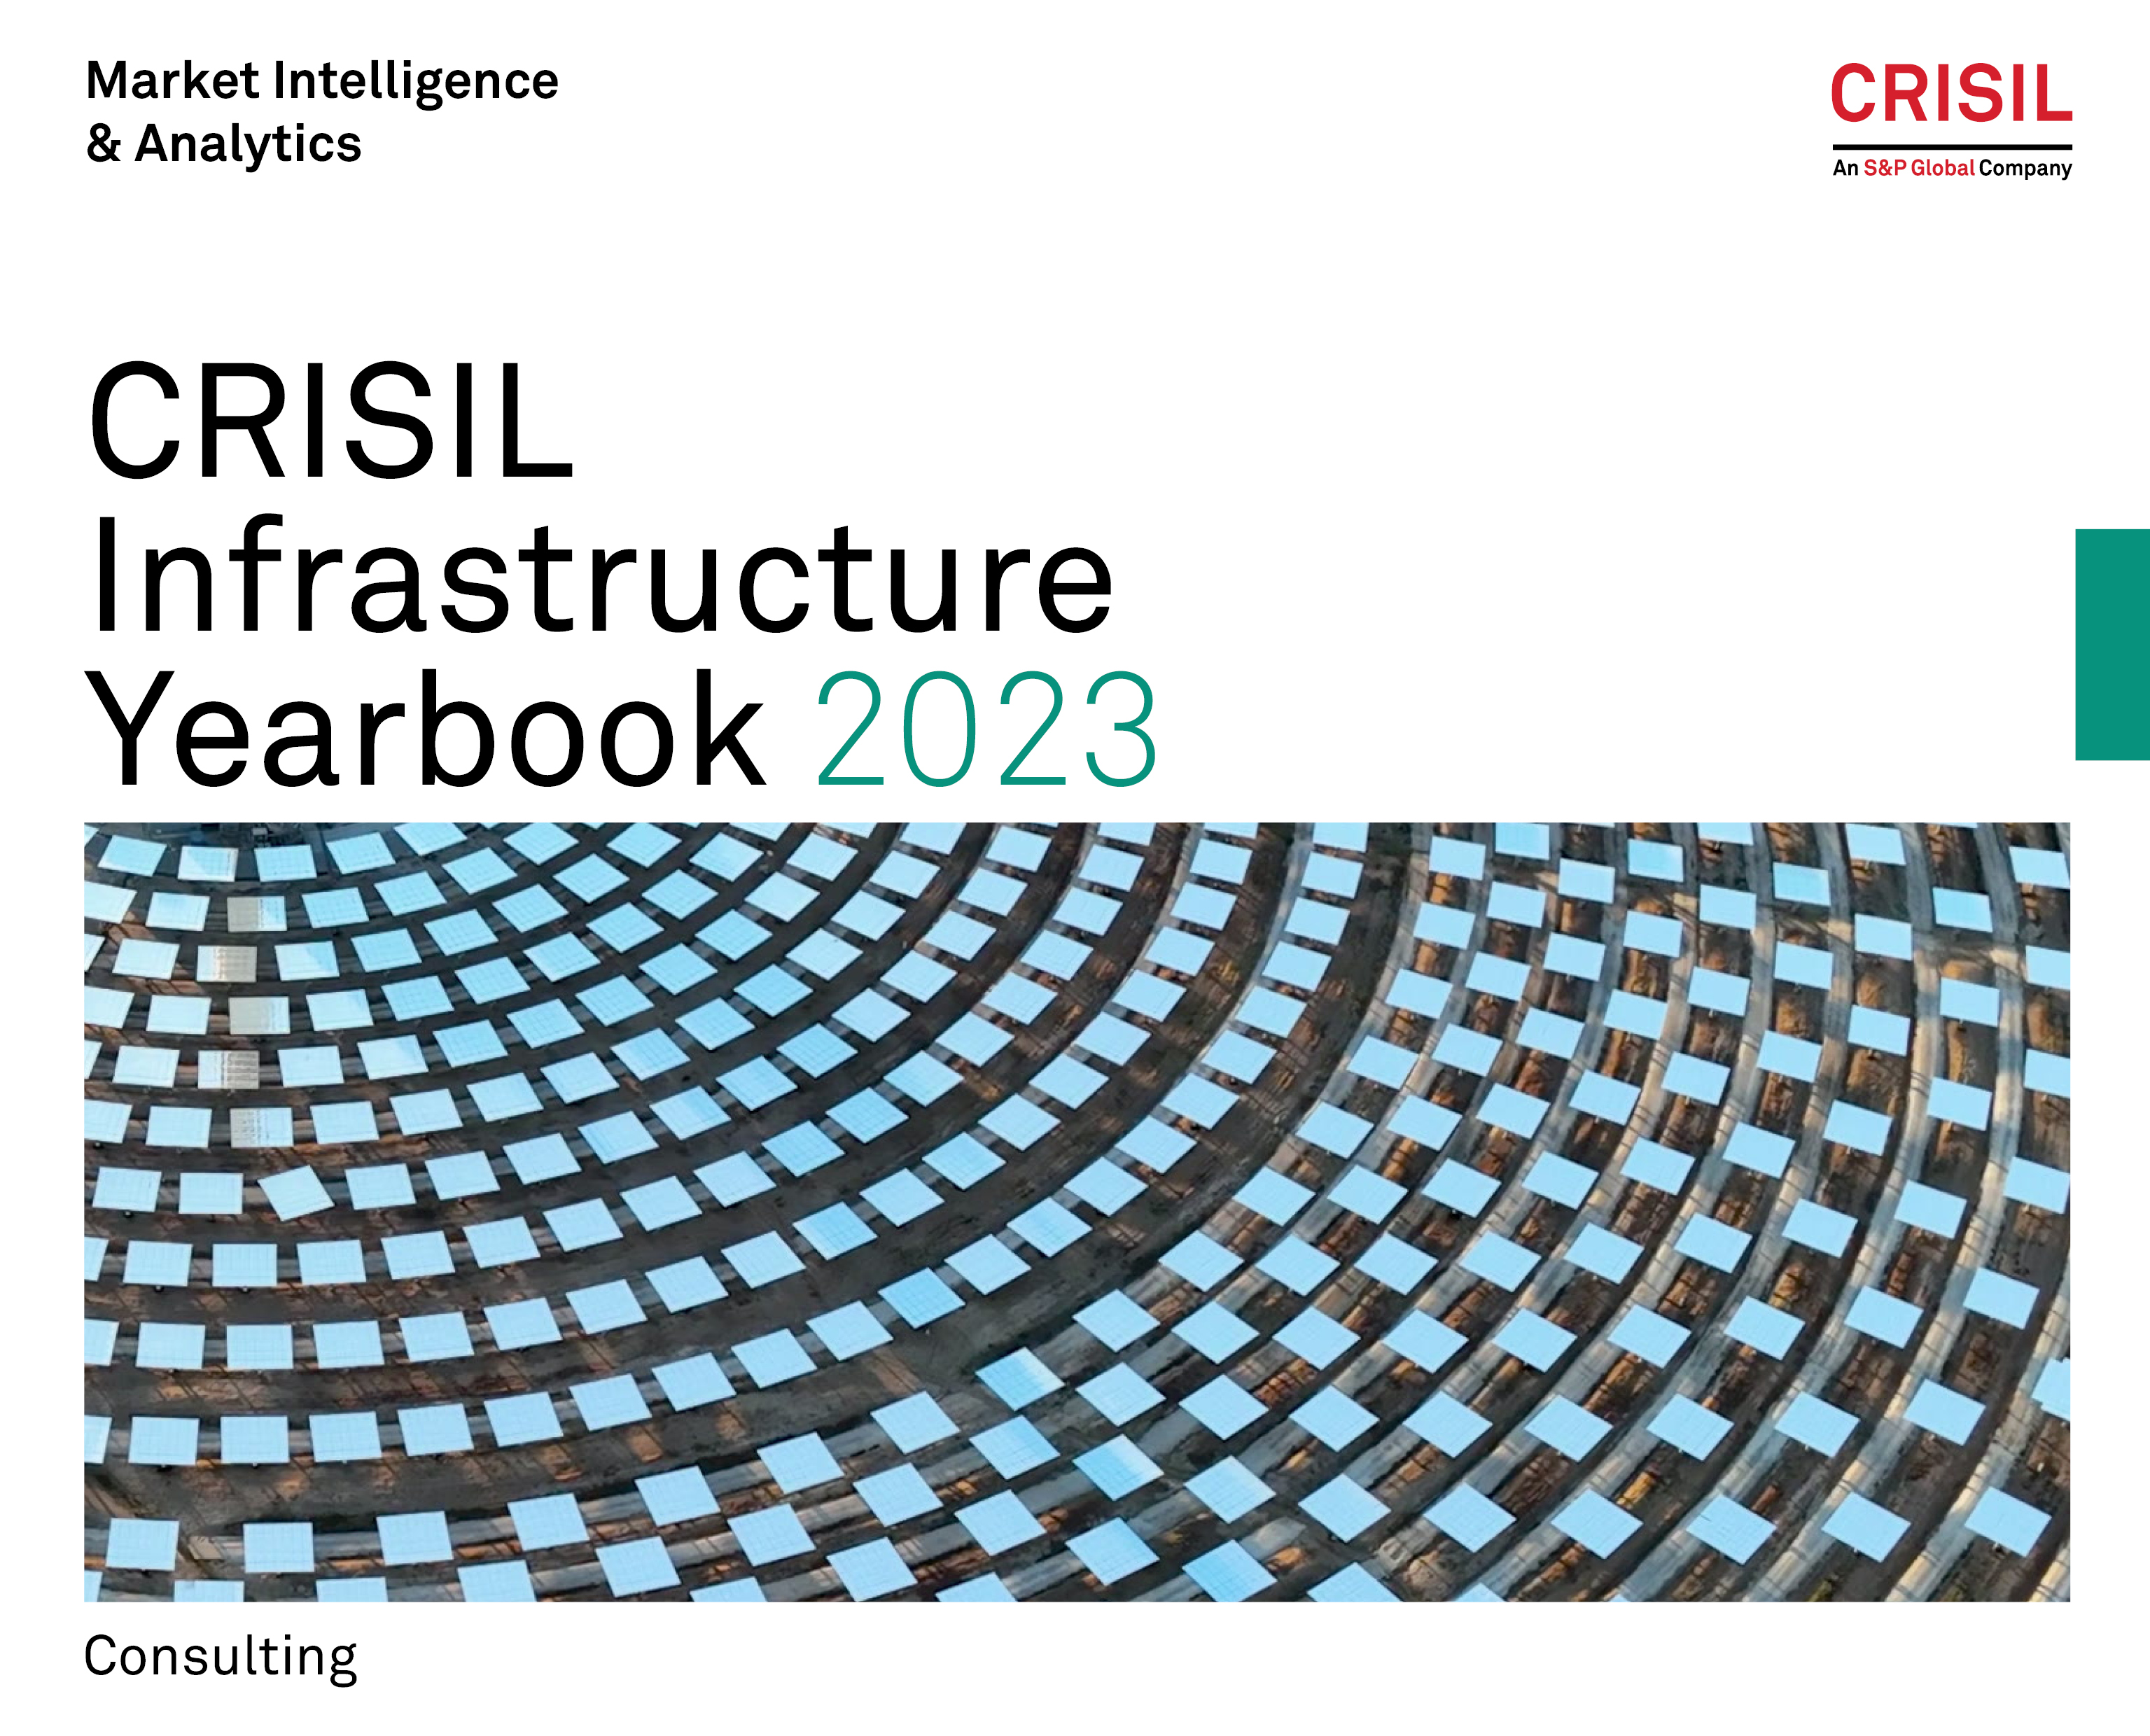 CRISIL Infrastructure Yearbook 2023